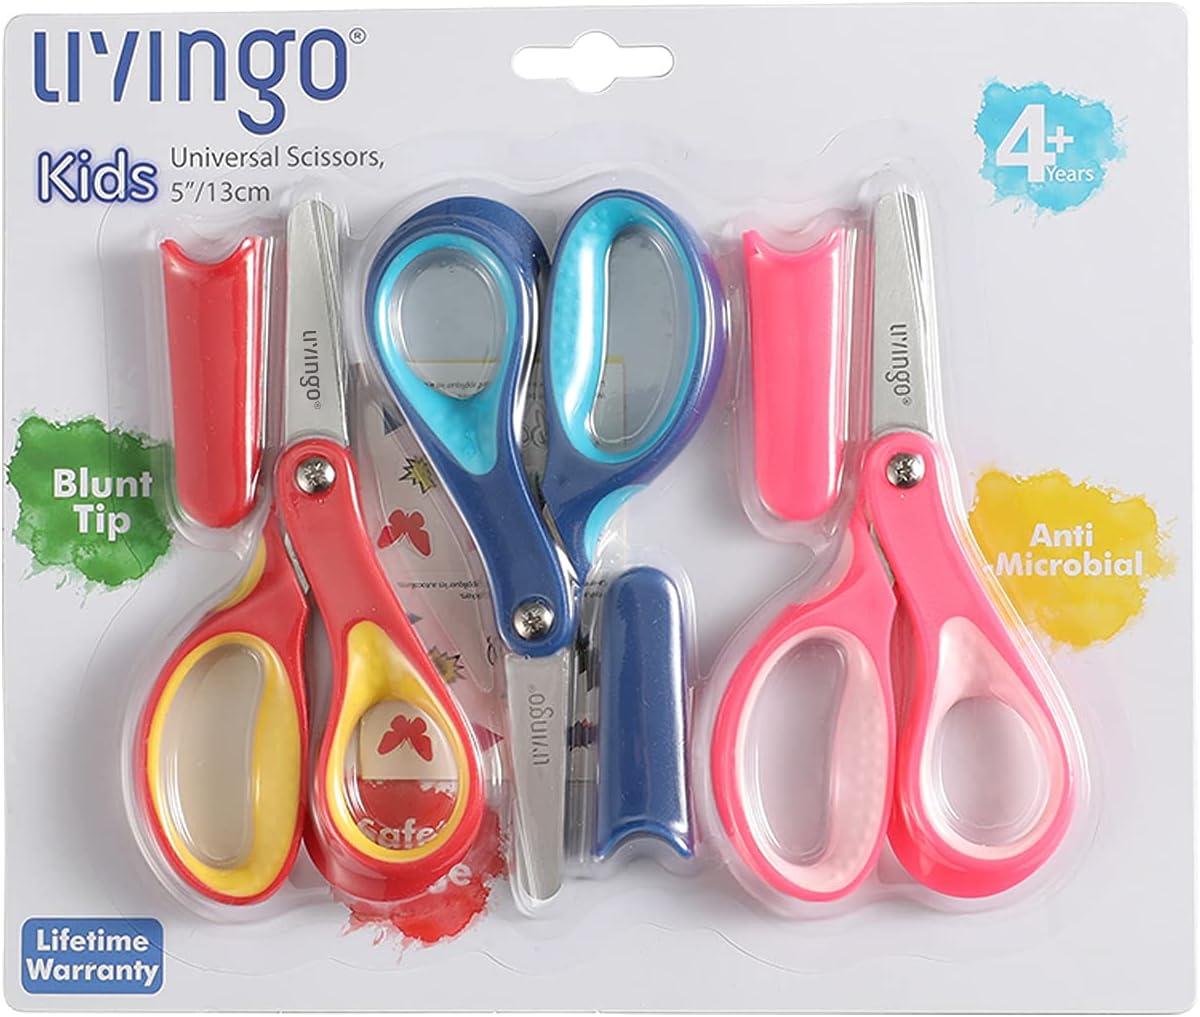  LIVINGO 3 Pack 5” Kids Scissors, Left/Right Handed Blunt  Stainless Safety Toddler Preschool Child Scissors with Cover, School  Classroom Craft Supplies for Teachers, Yellow/Blue/Gray : Toys & Games